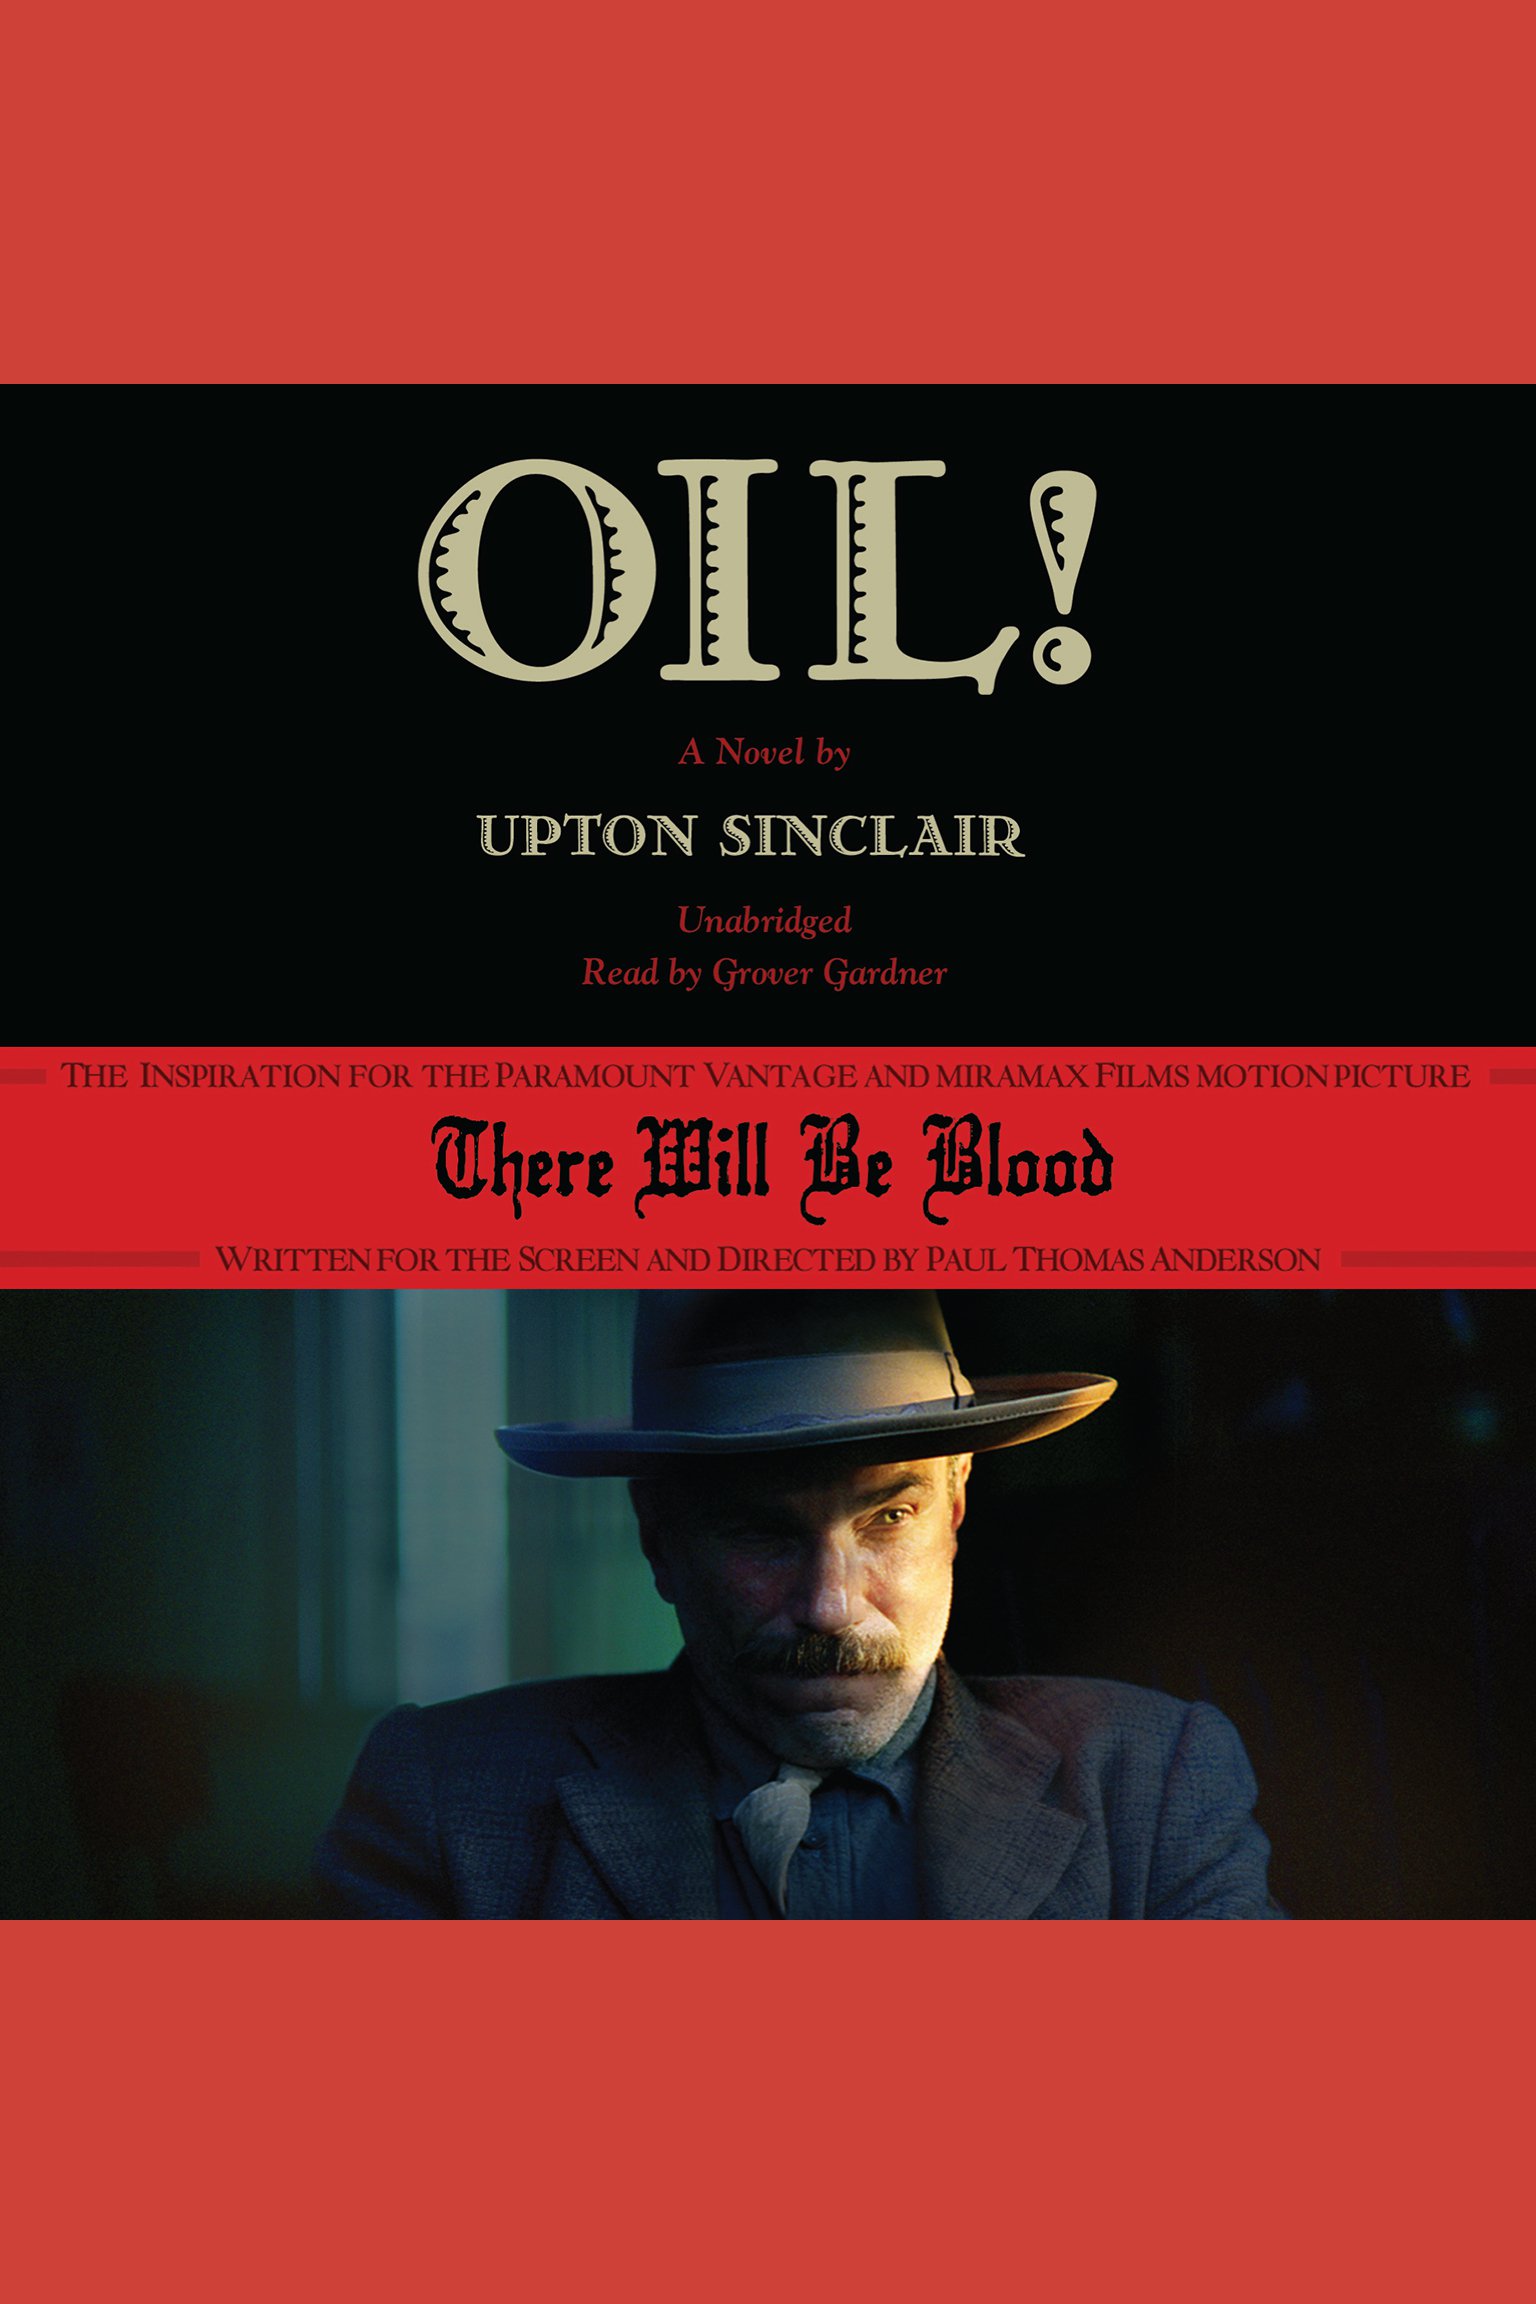 Oil! cover image